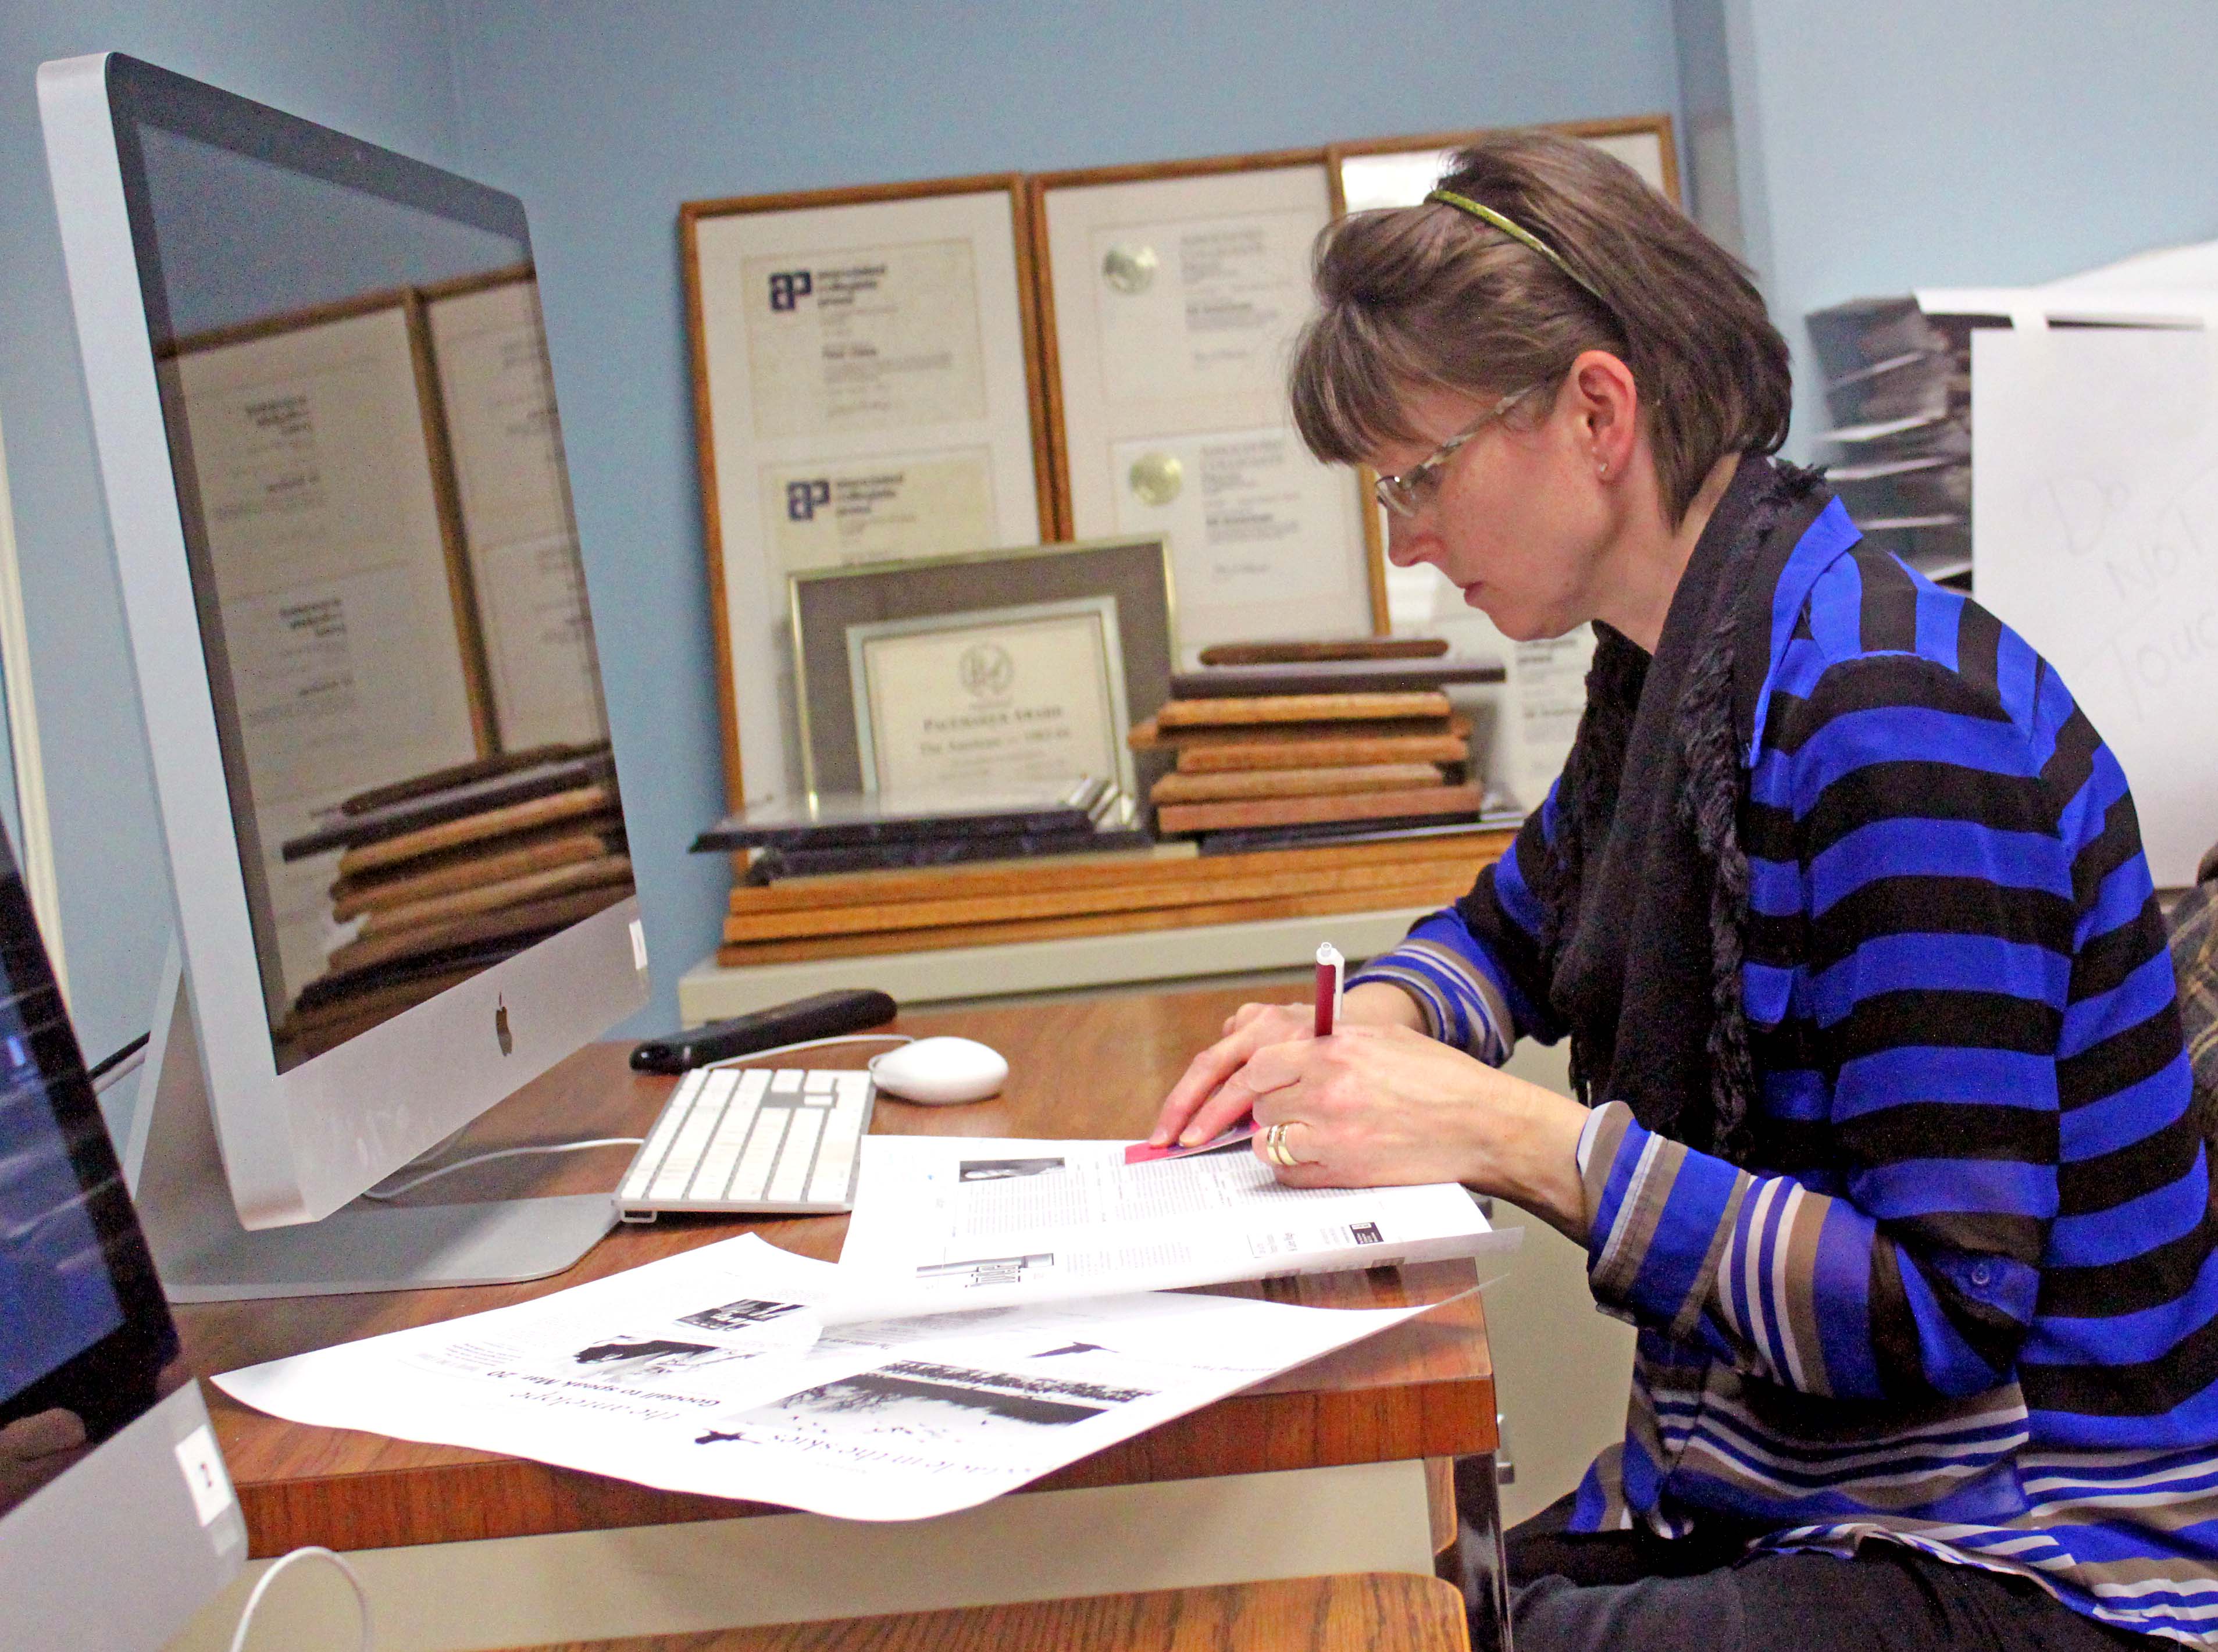 Joene Crocker edits a page for the UNK student newspaper, The Antelope, where she is a member of the staff. (Photo by Austin Koeller/UNK Communications)